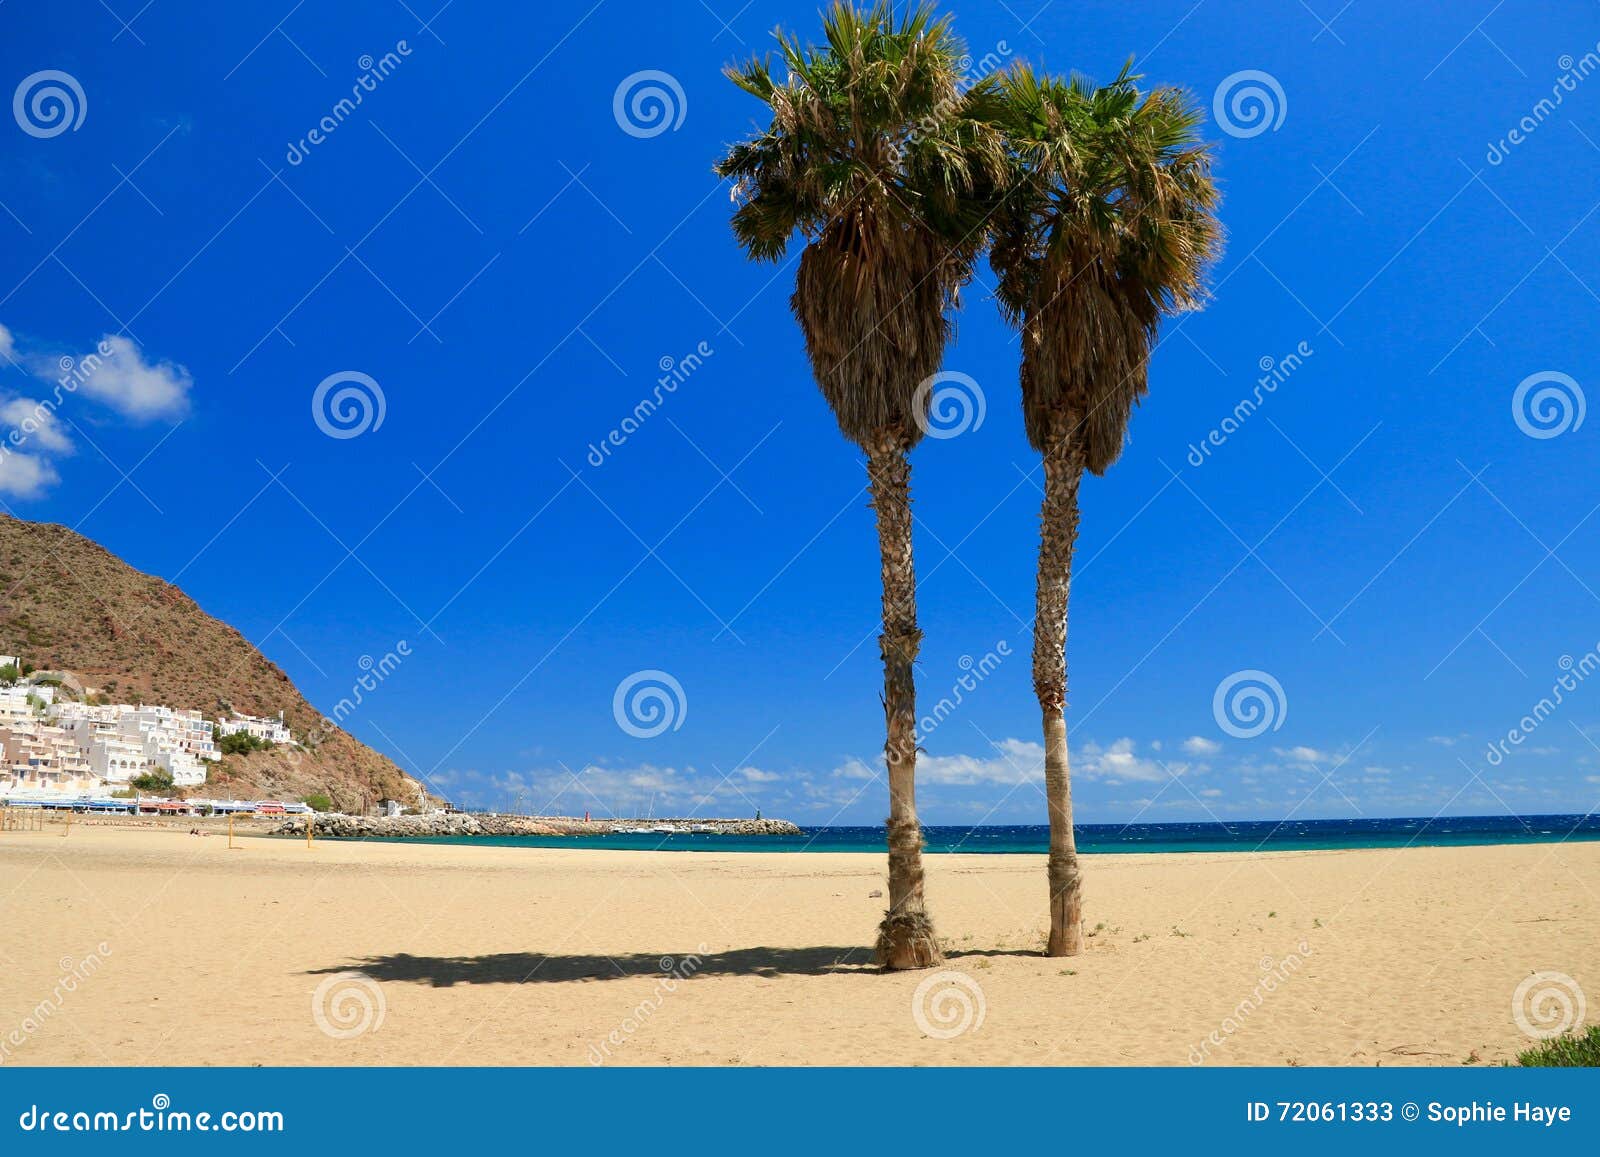 two palmtrees in the beach of san jose , spain